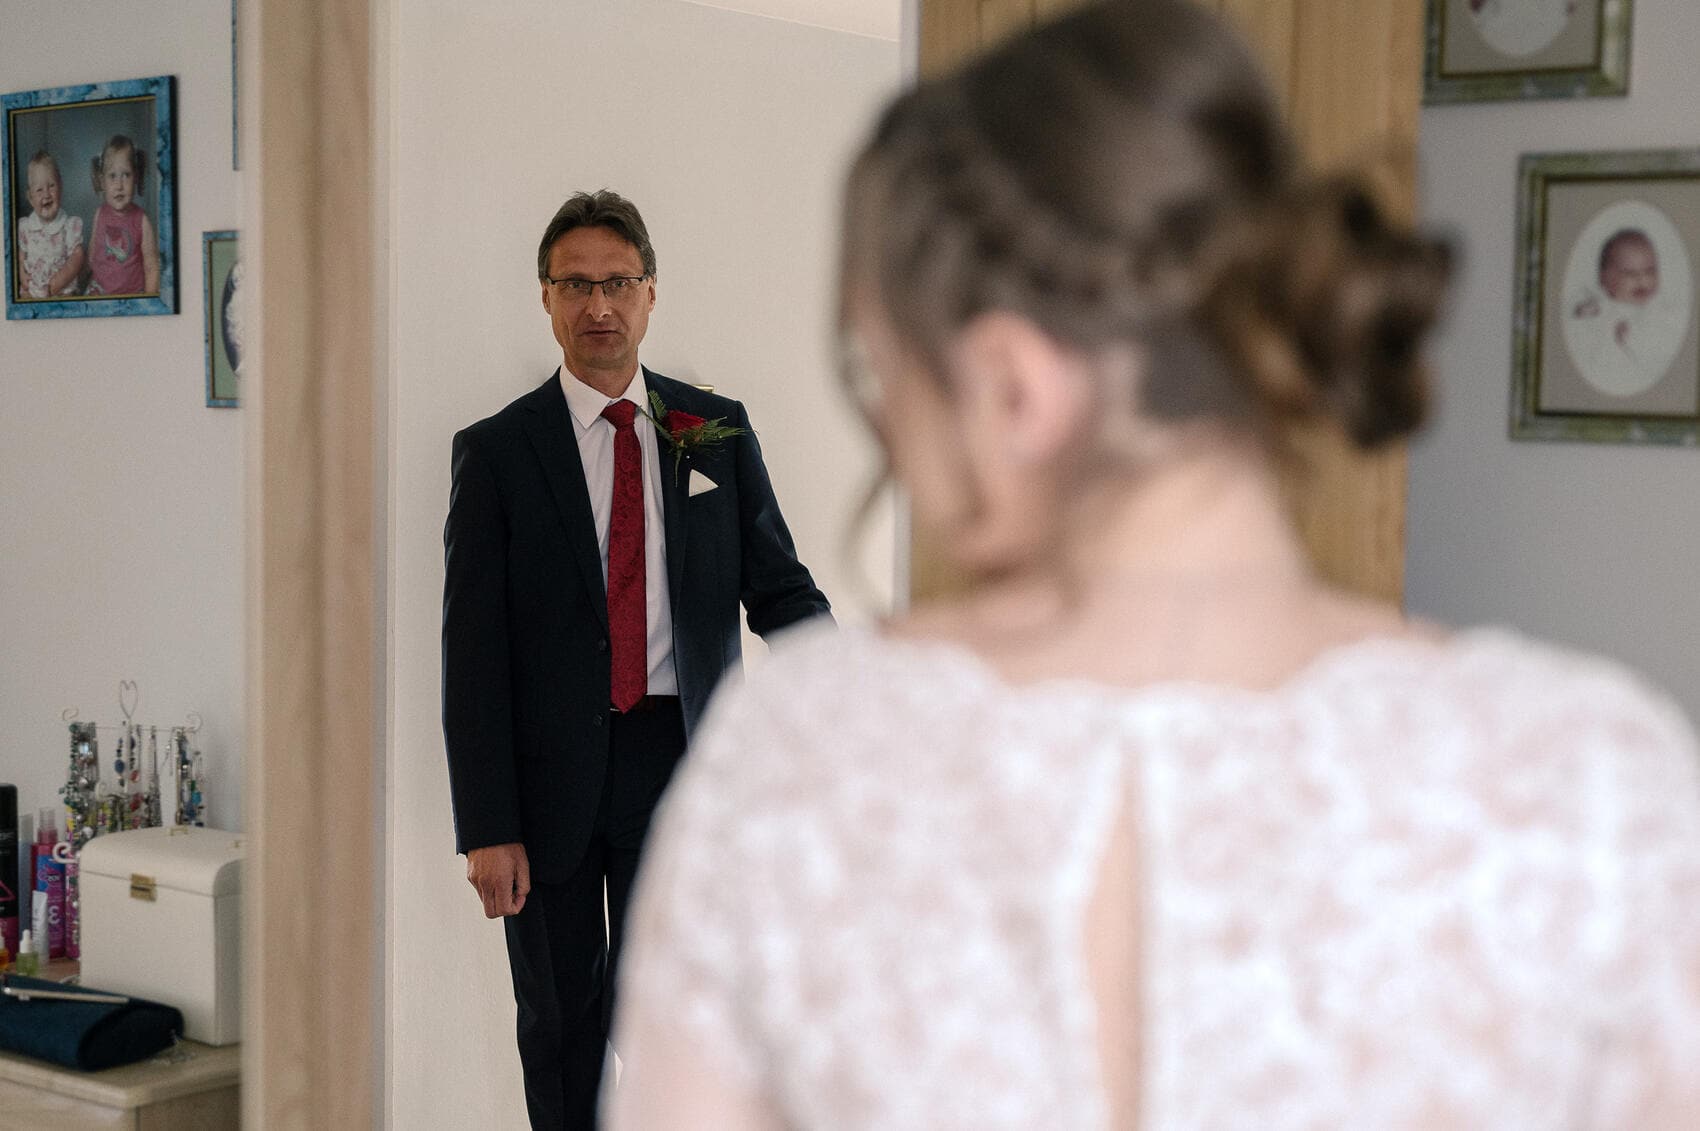 father of the bride sees his daughter in dress